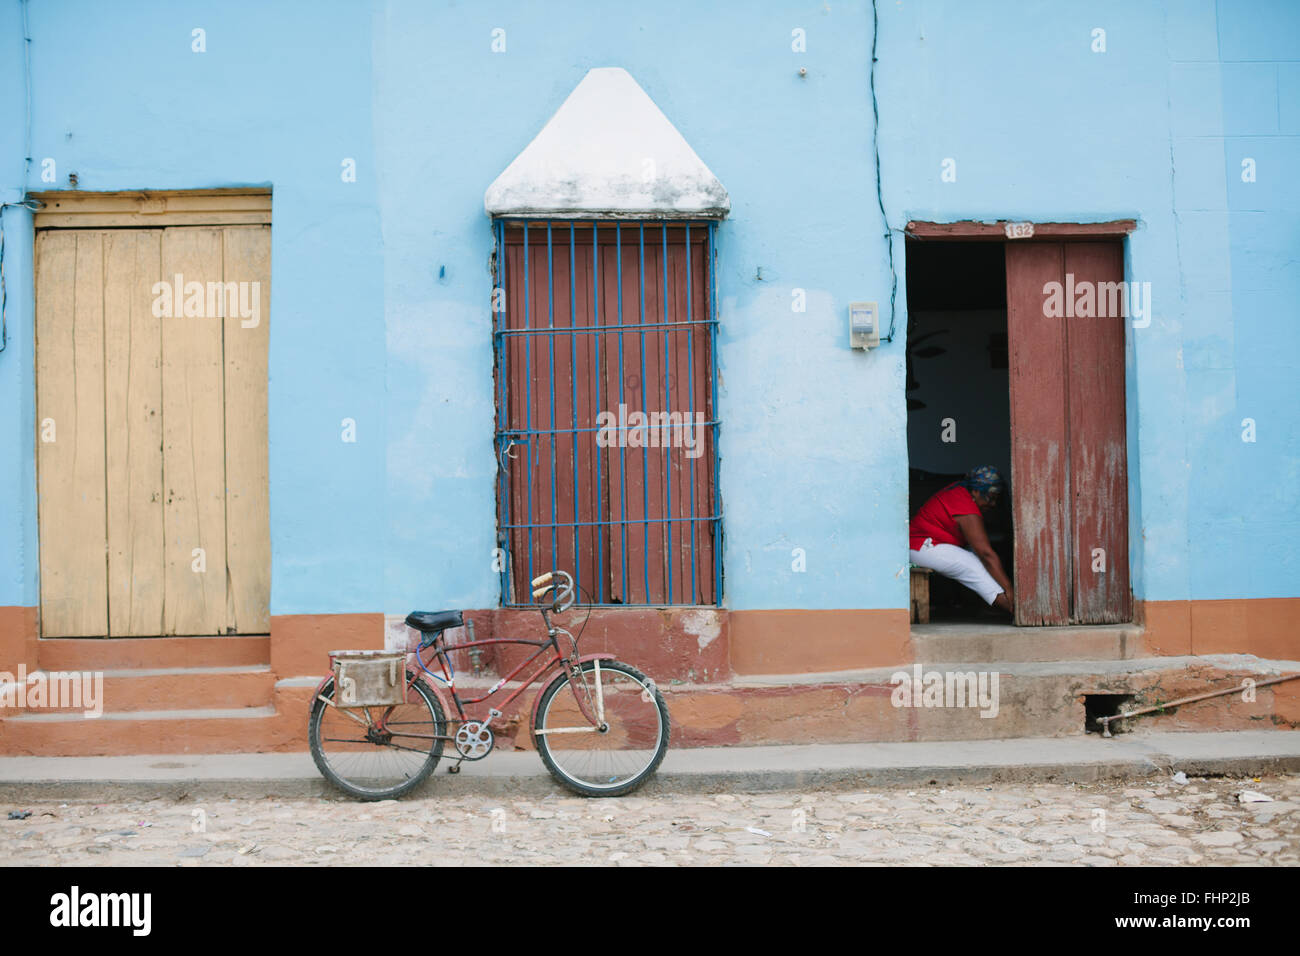 A bicycle parked in front of some doors in a blue building in a street of Trinidad, Cuba. A woman sits in one of the doorways. Stock Photo